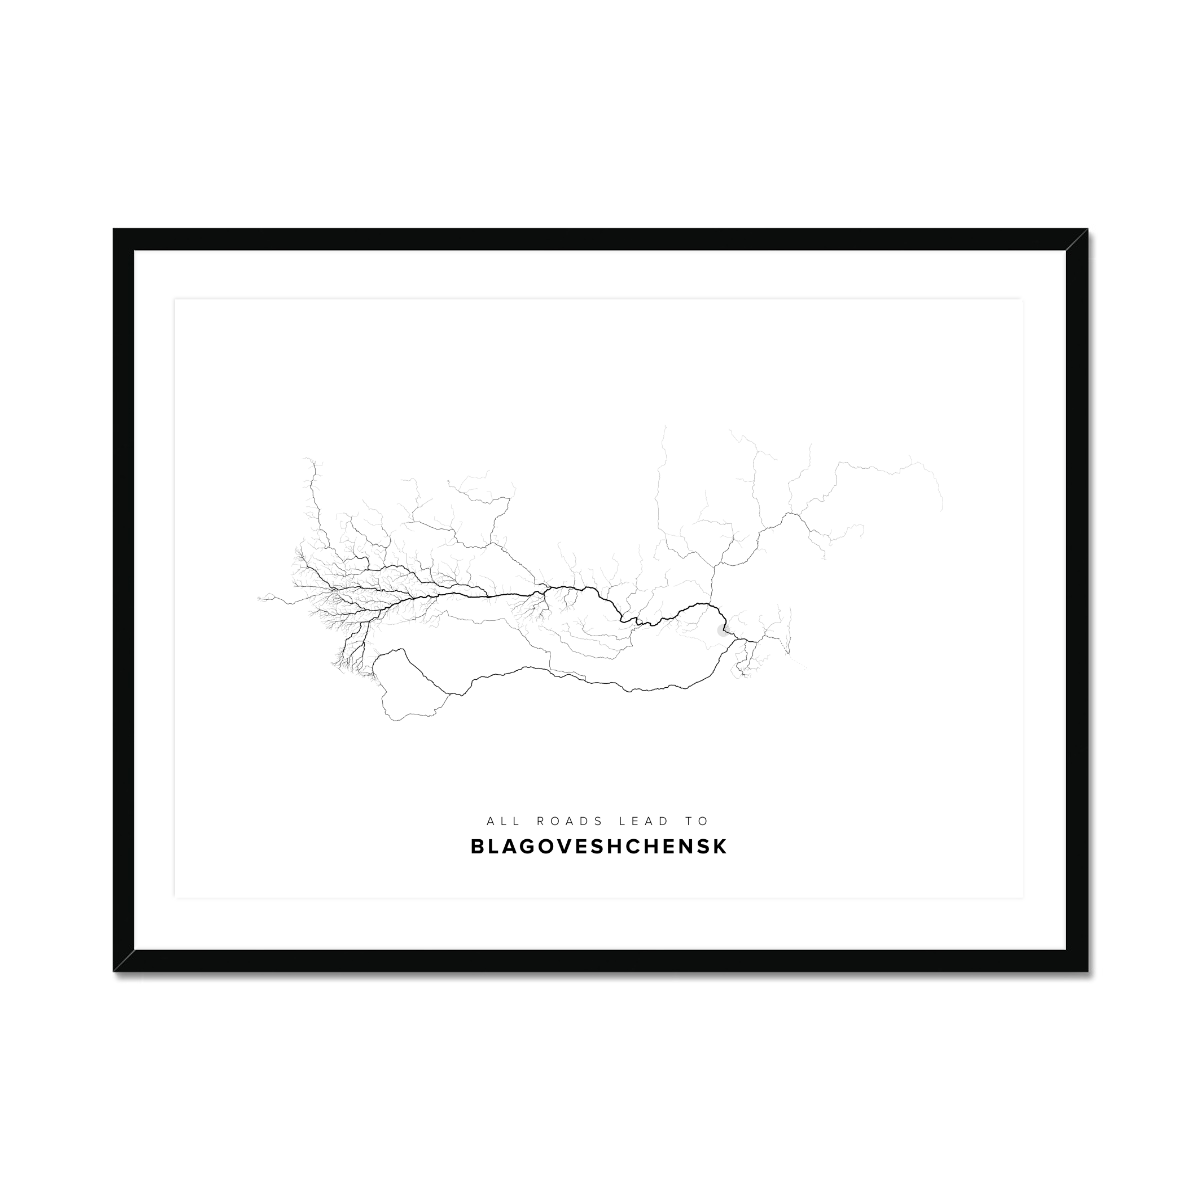 All roads lead to Blagoveshchensk (Russian Federation) Fine Art Map Print